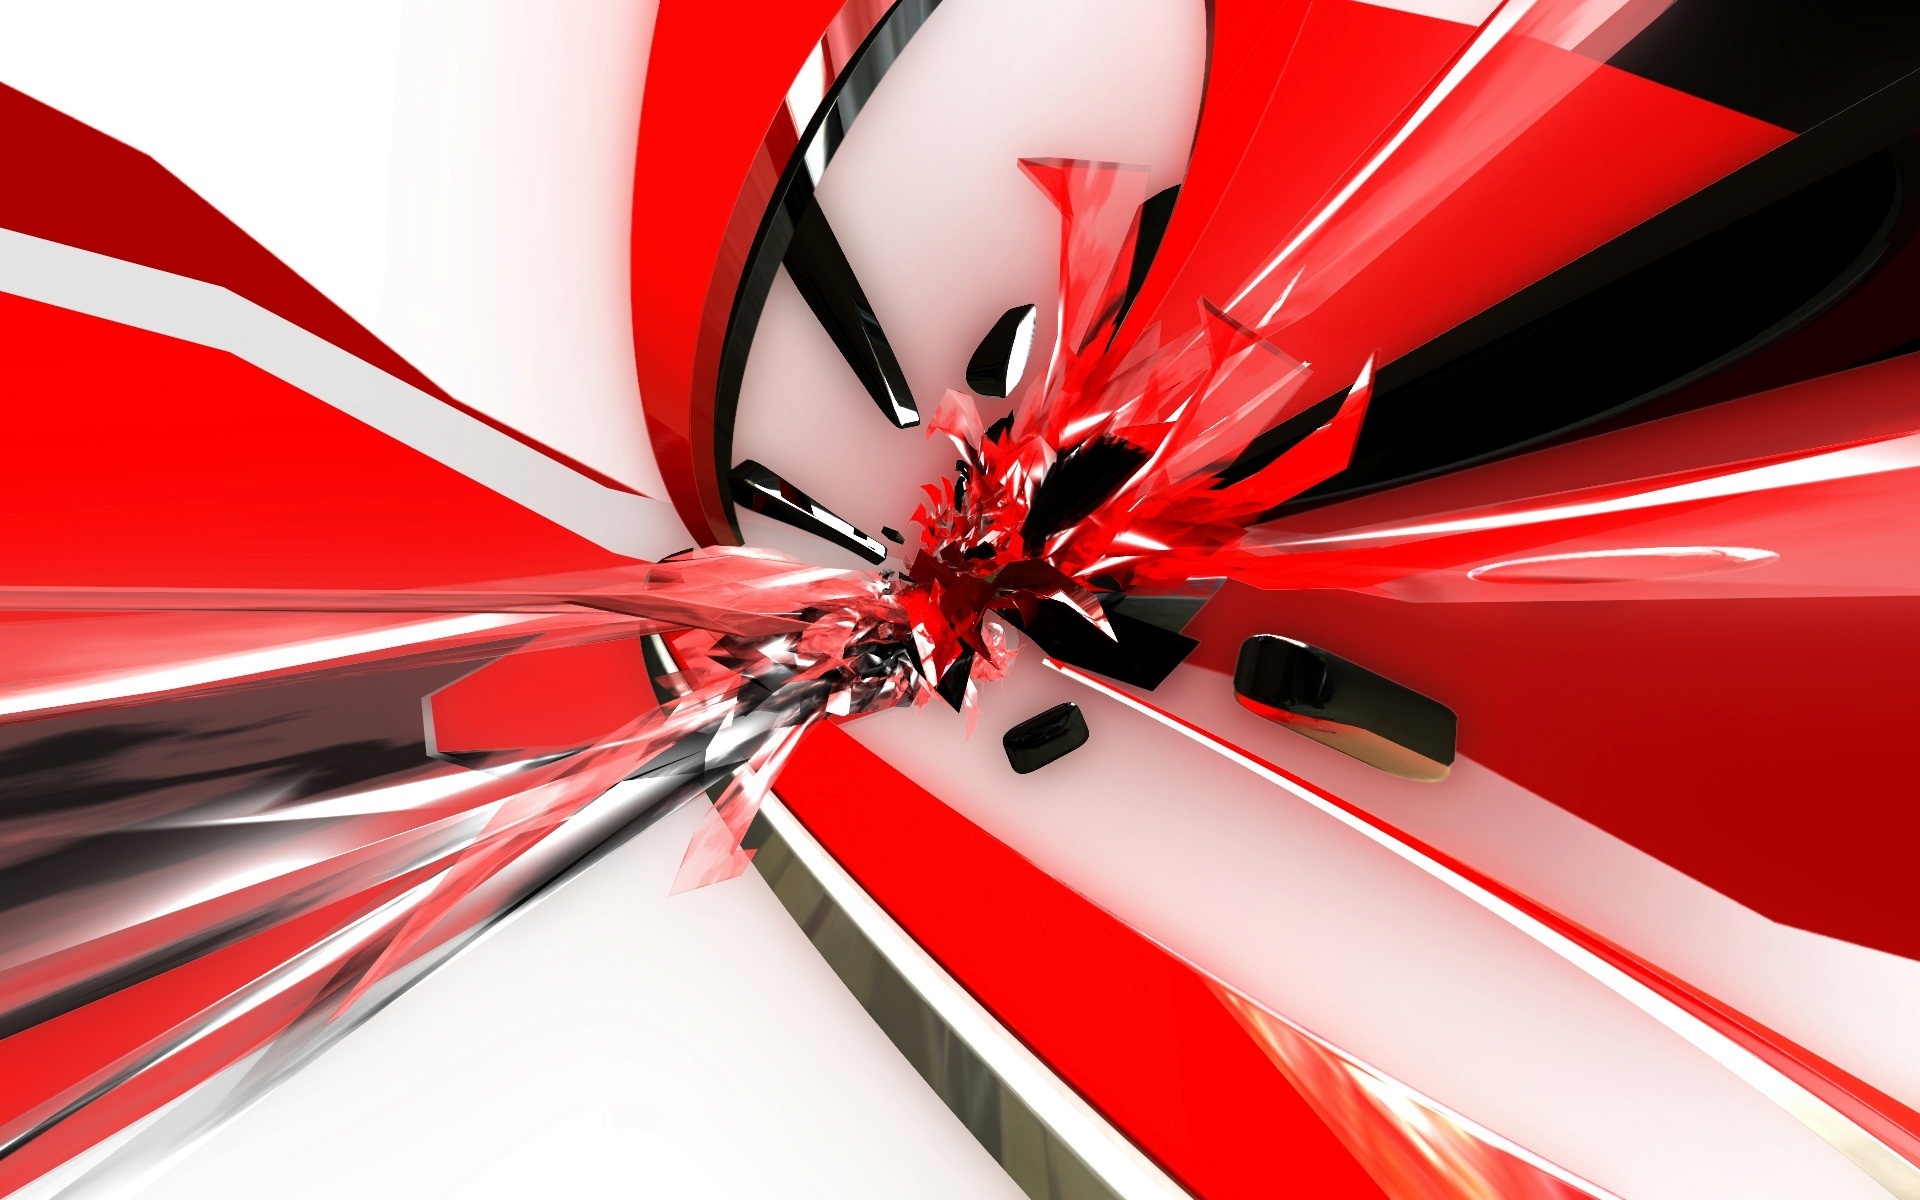 Cool Abstract Wallpaper Designs Red Cool Abstract 1920x1200